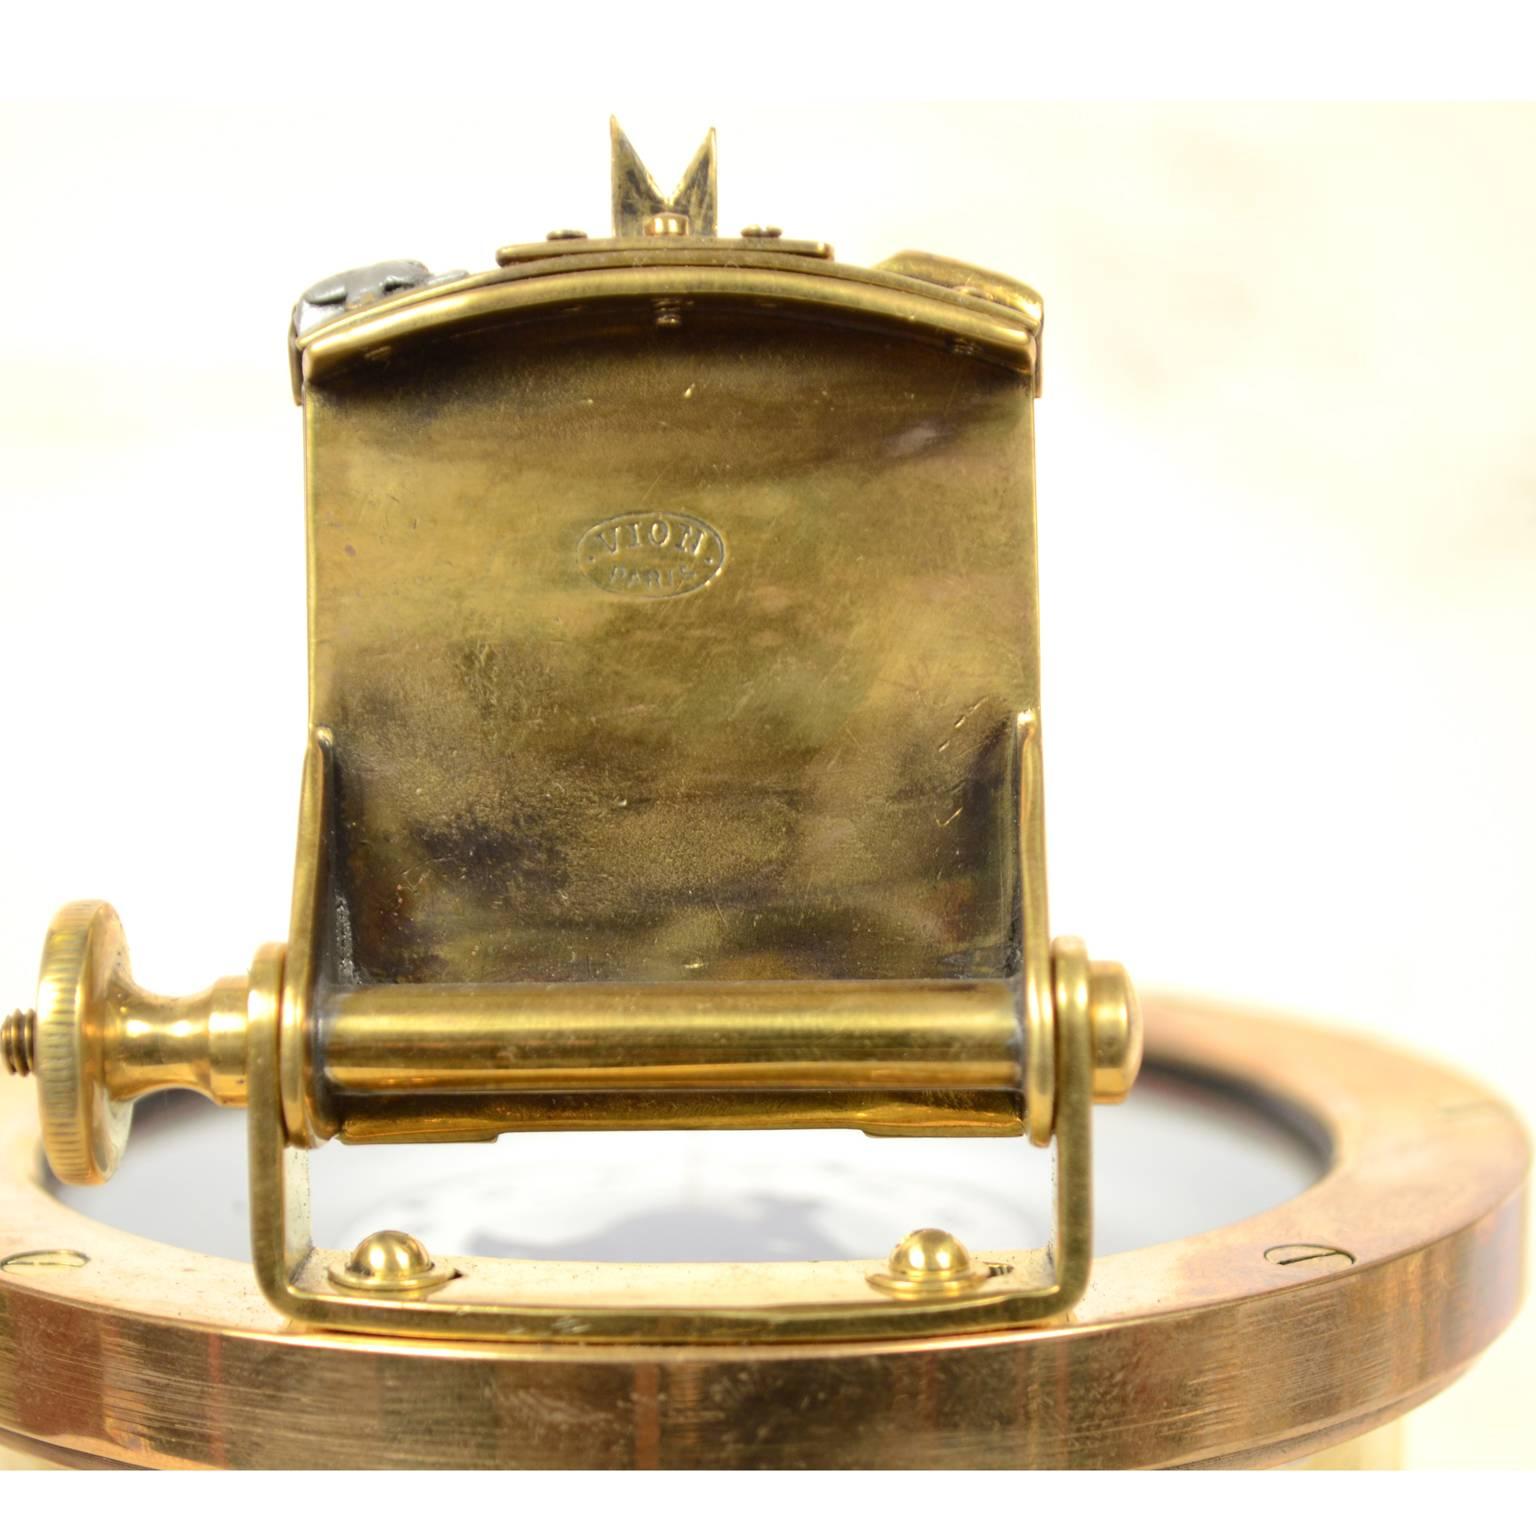 Nautical Brass Magnetic Compass with Original Box by E. Vion Paris, Early 1900 For Sale 7